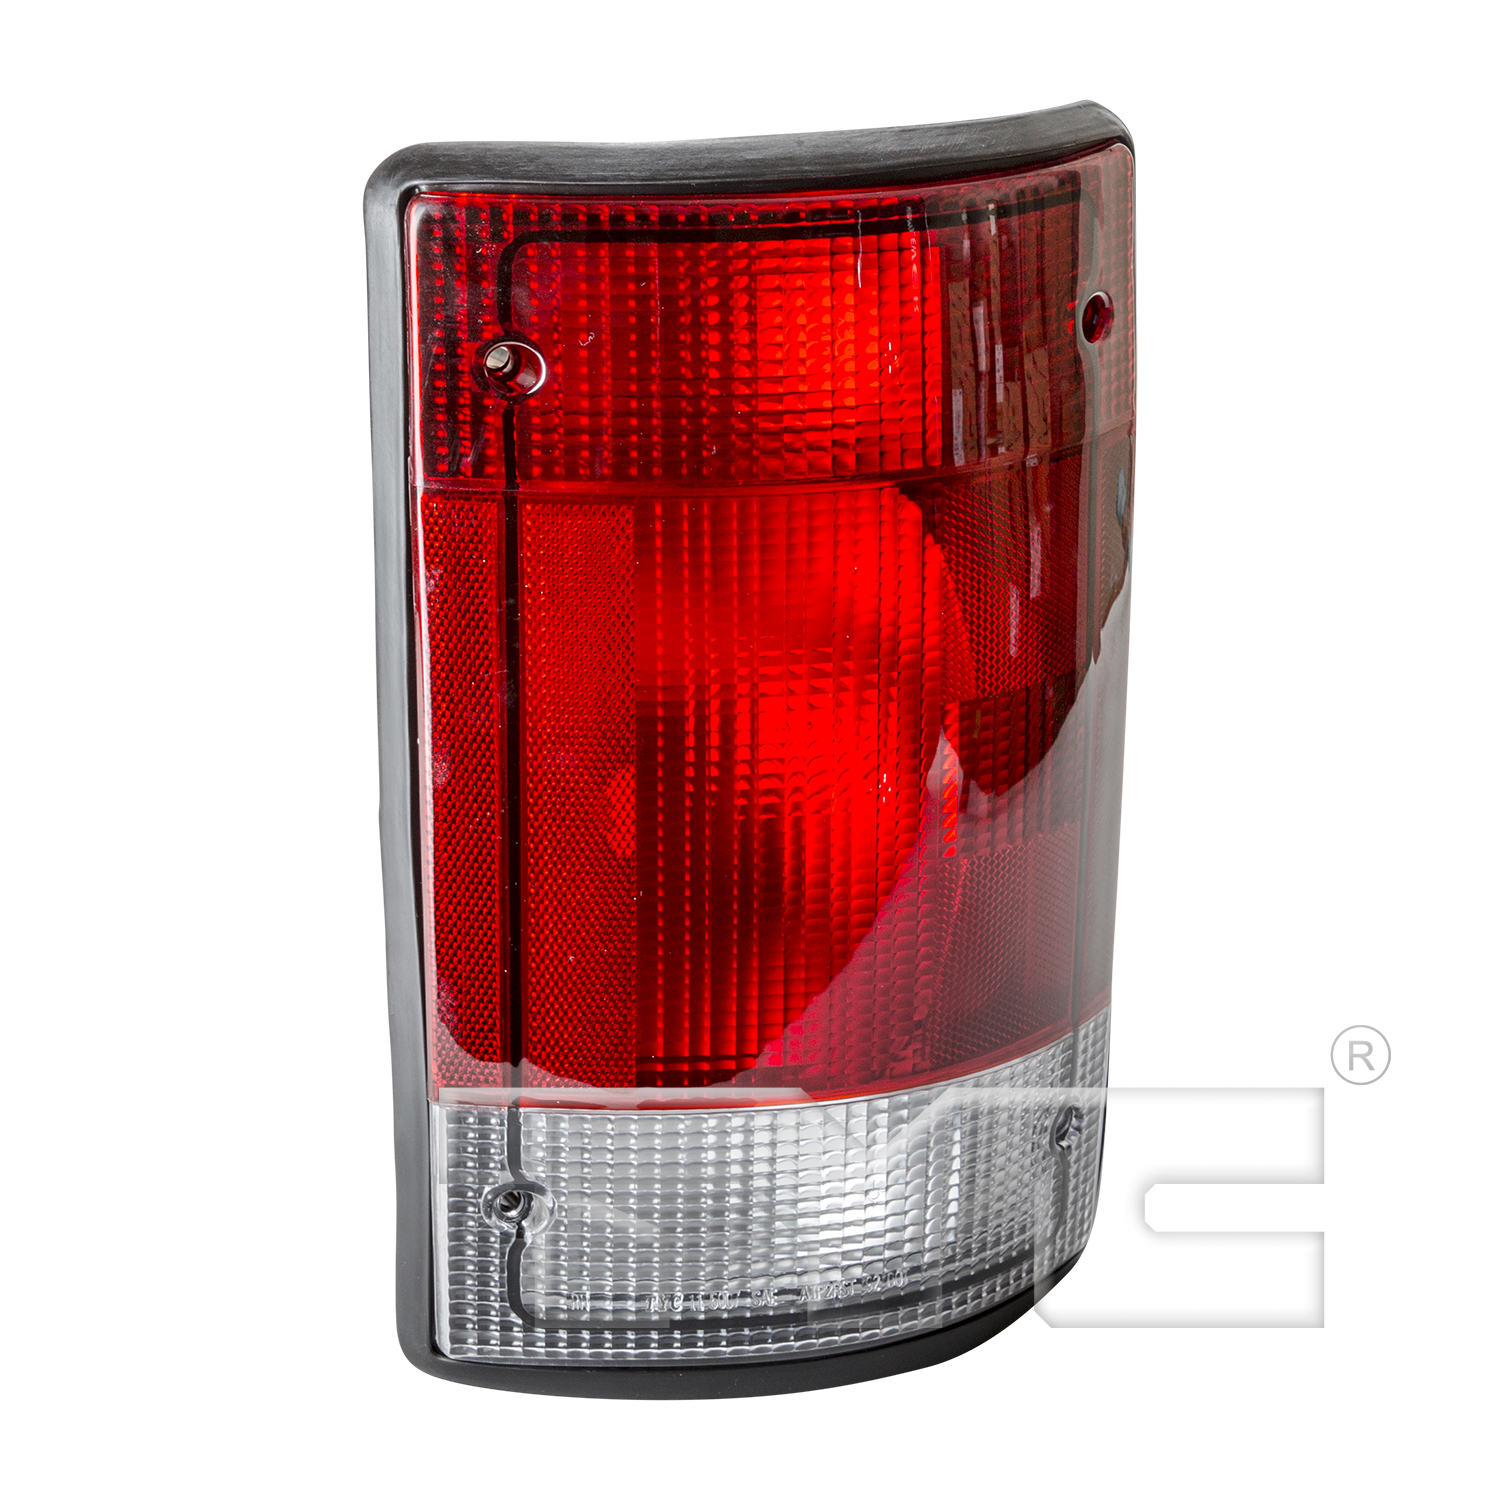 Aftermarket TAILLIGHTS for FORD - E-350 ECONOLINE CLUB WAGON, E-350 ECONOLINE CLUB WAGON,95-02,RT Taillamp assy